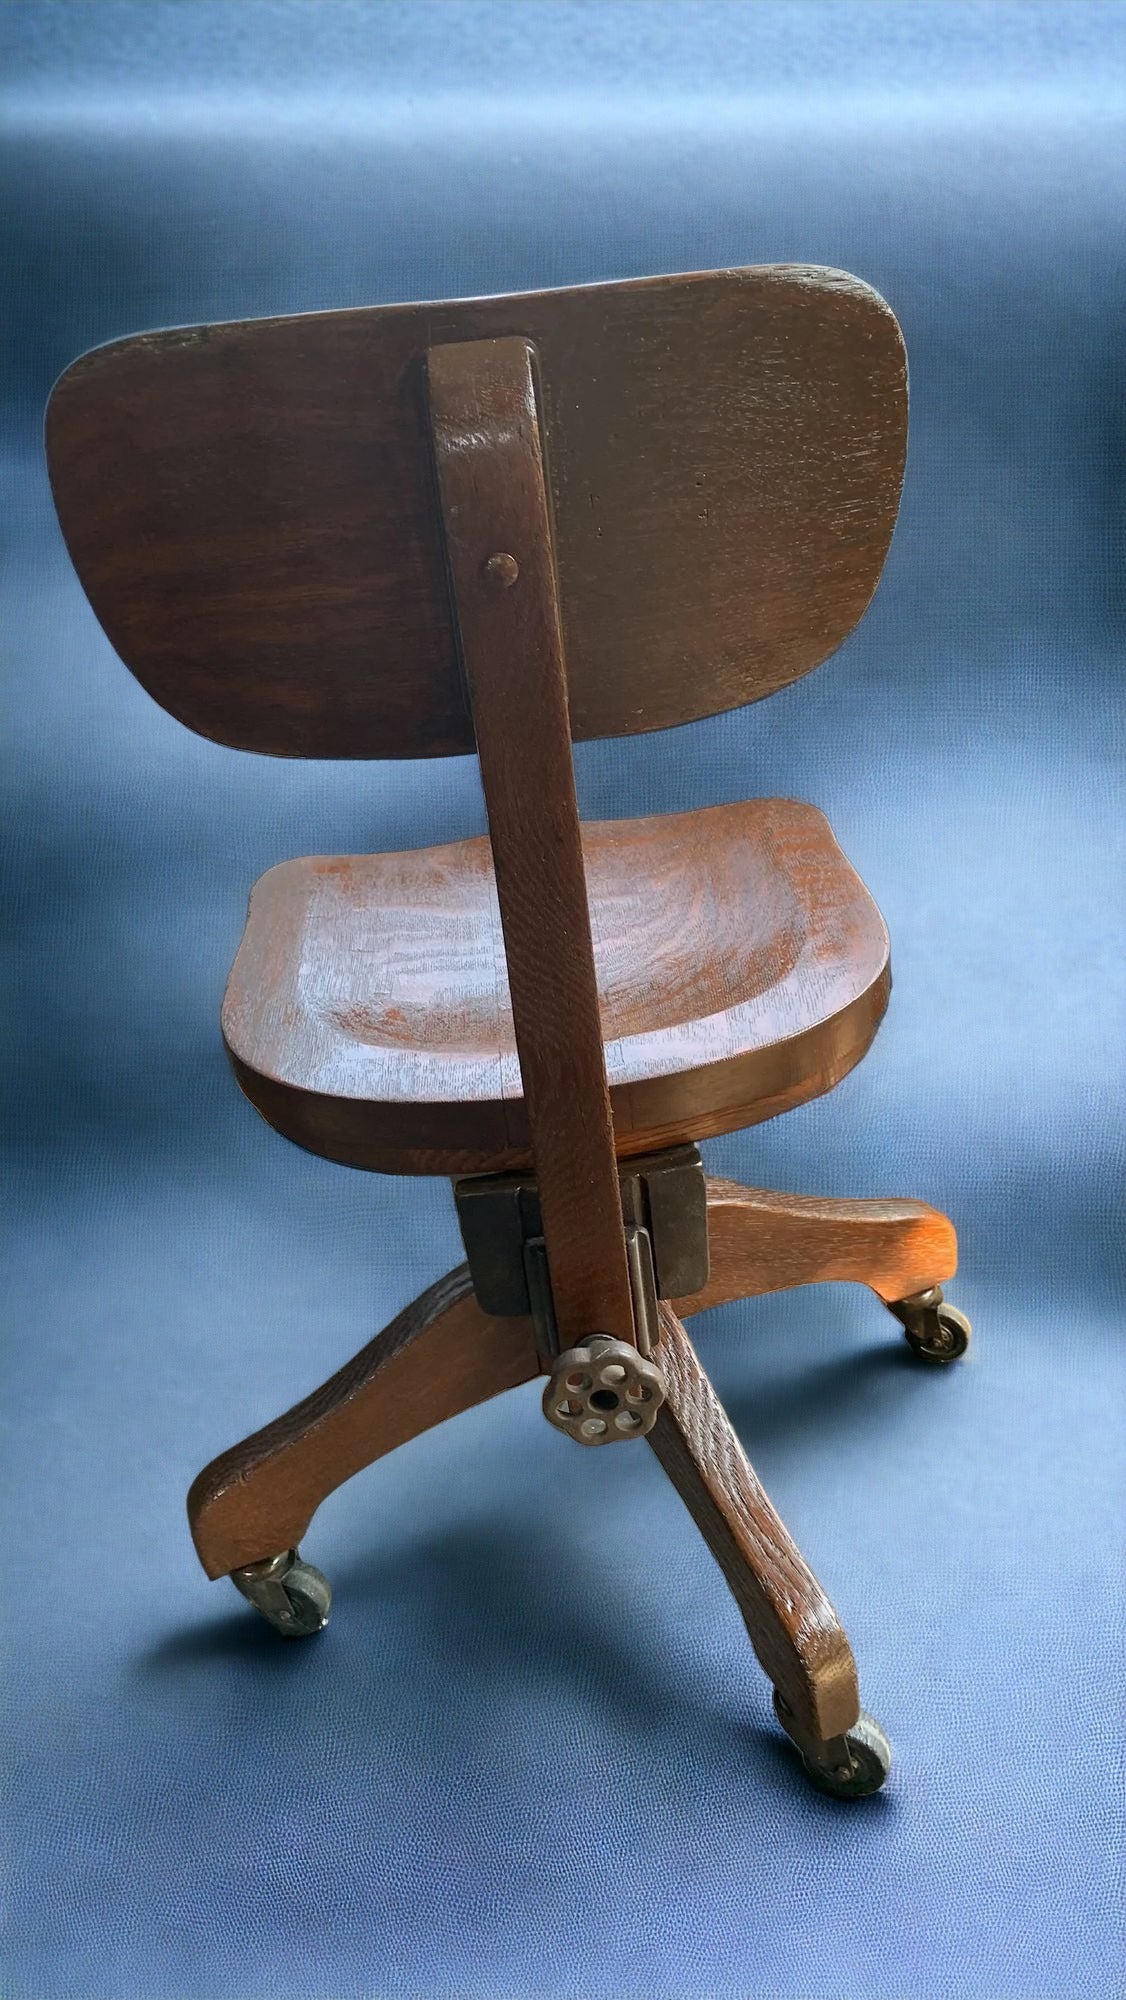 Antique Bankers Chair